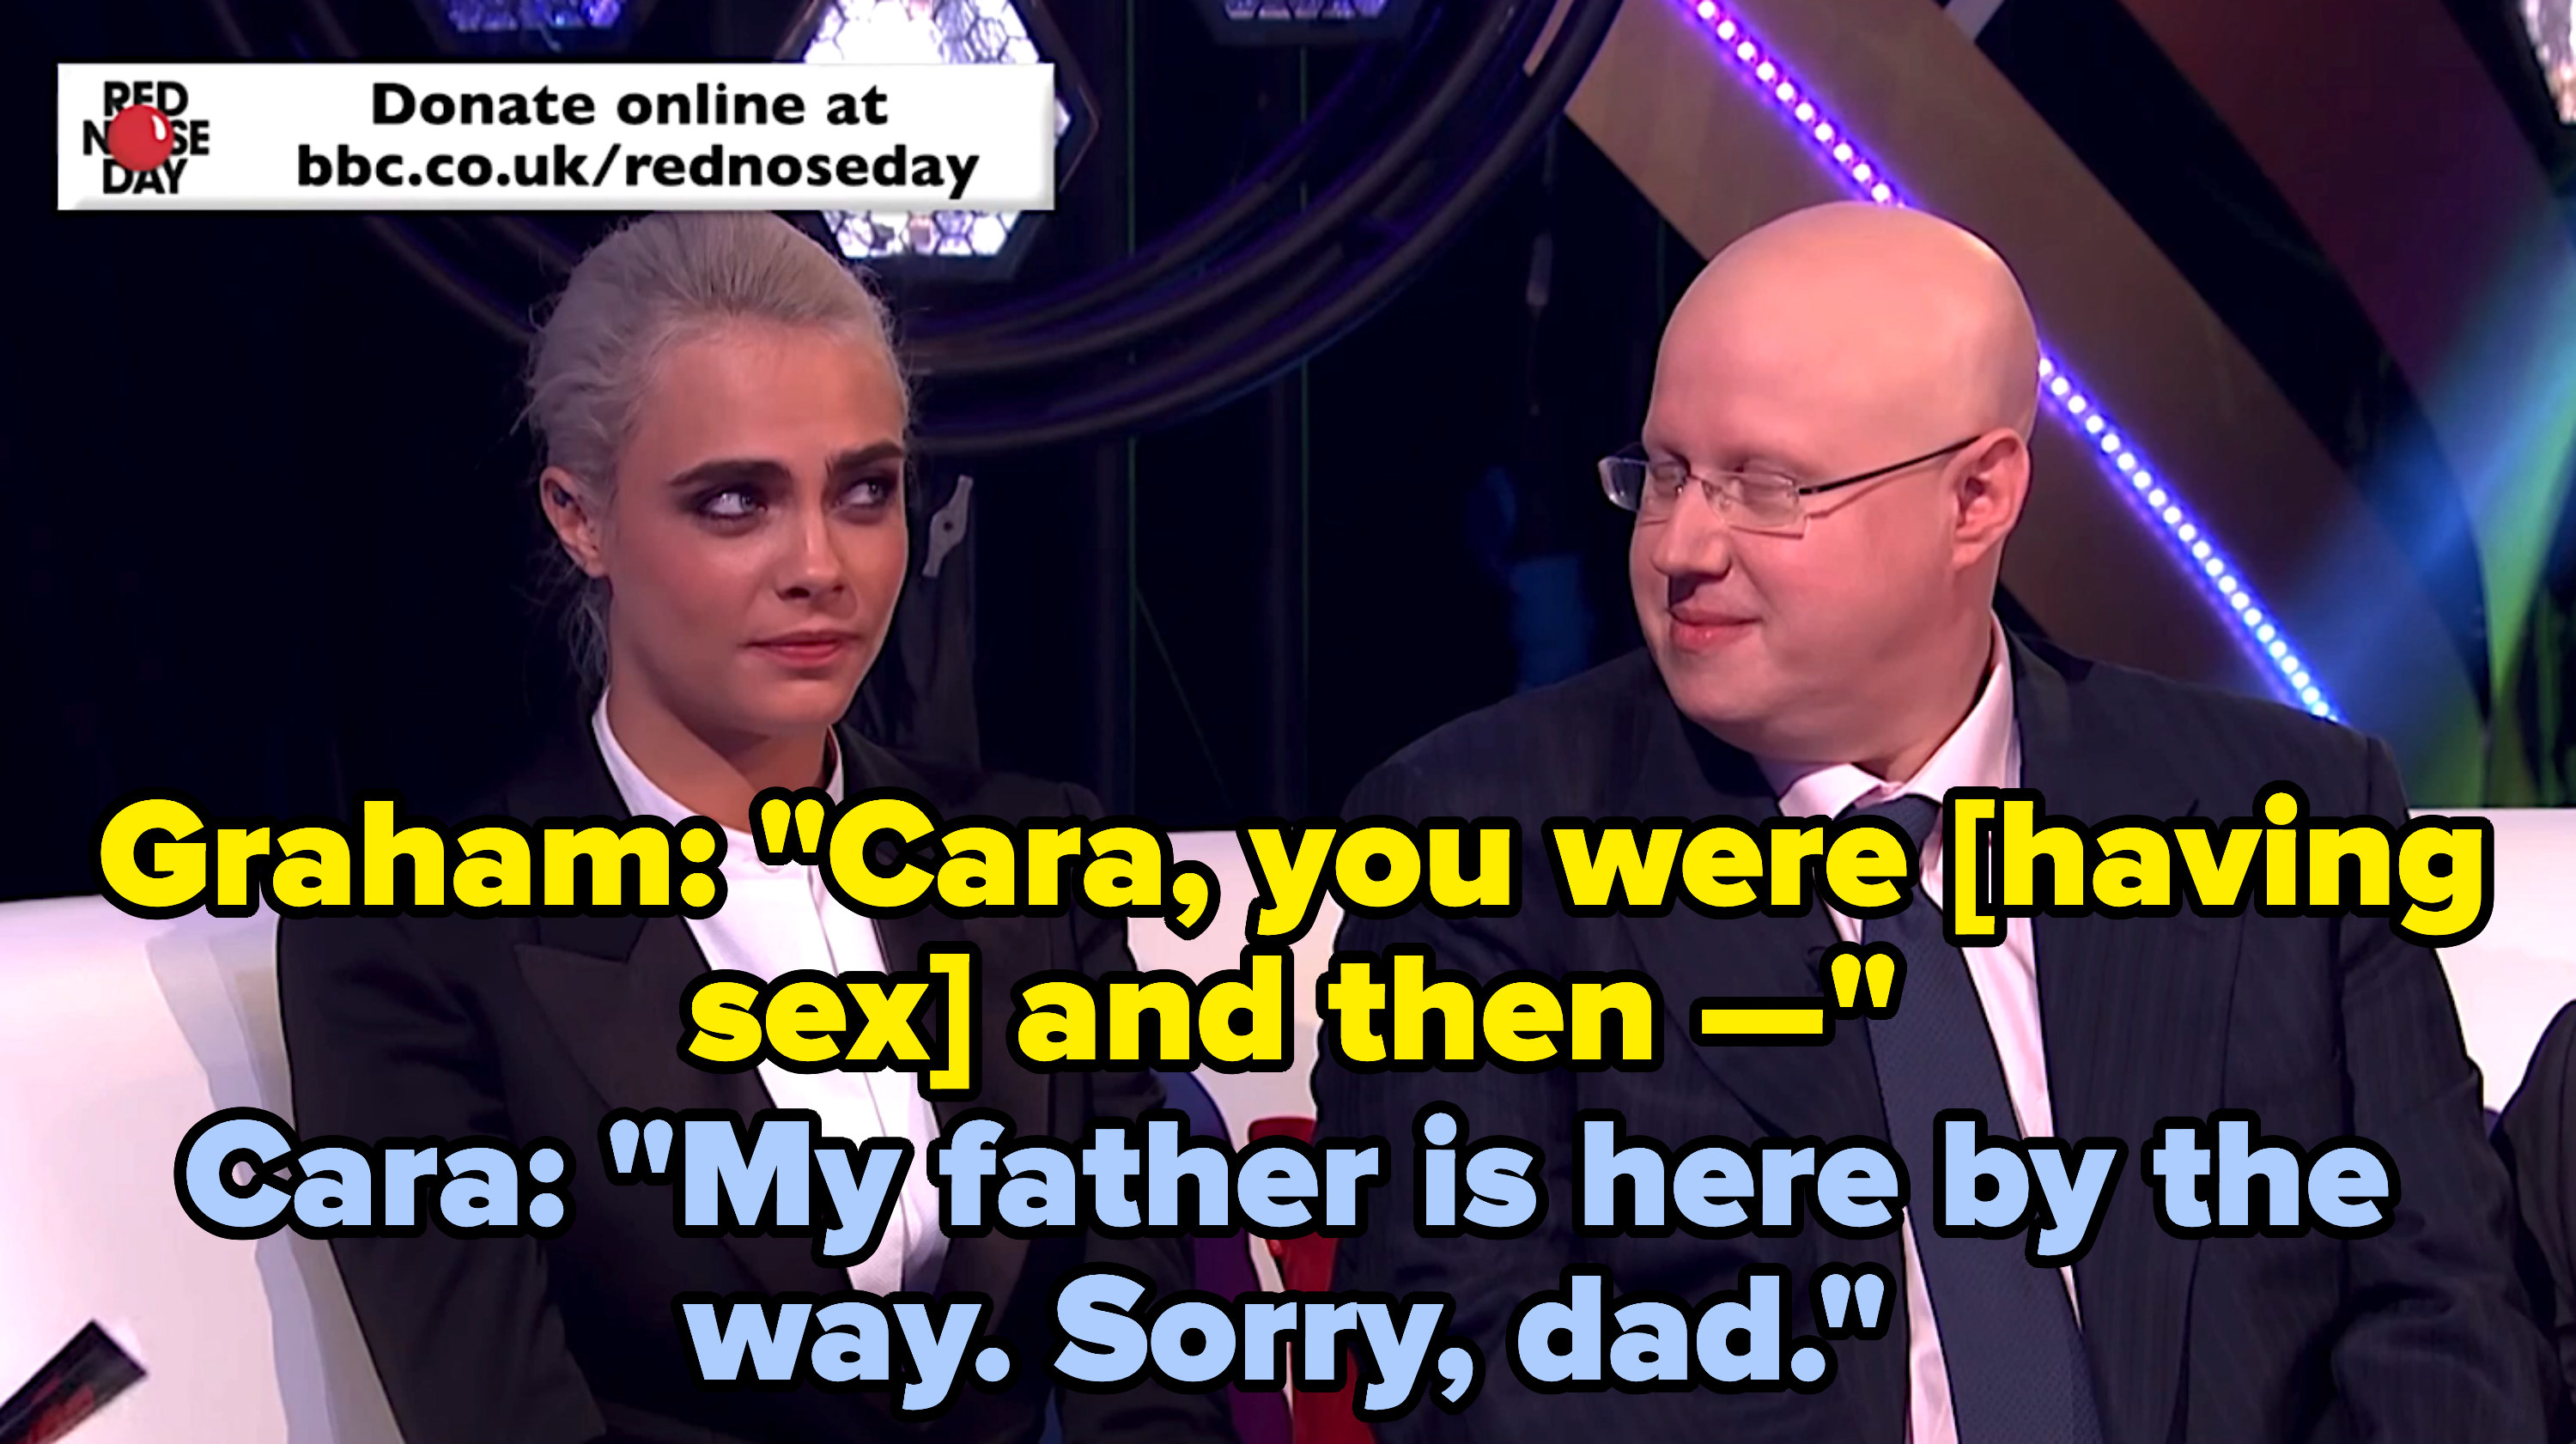 graham: cara, you were having sex and then cara cuts him off saying, my father is here by the way. sorry dad